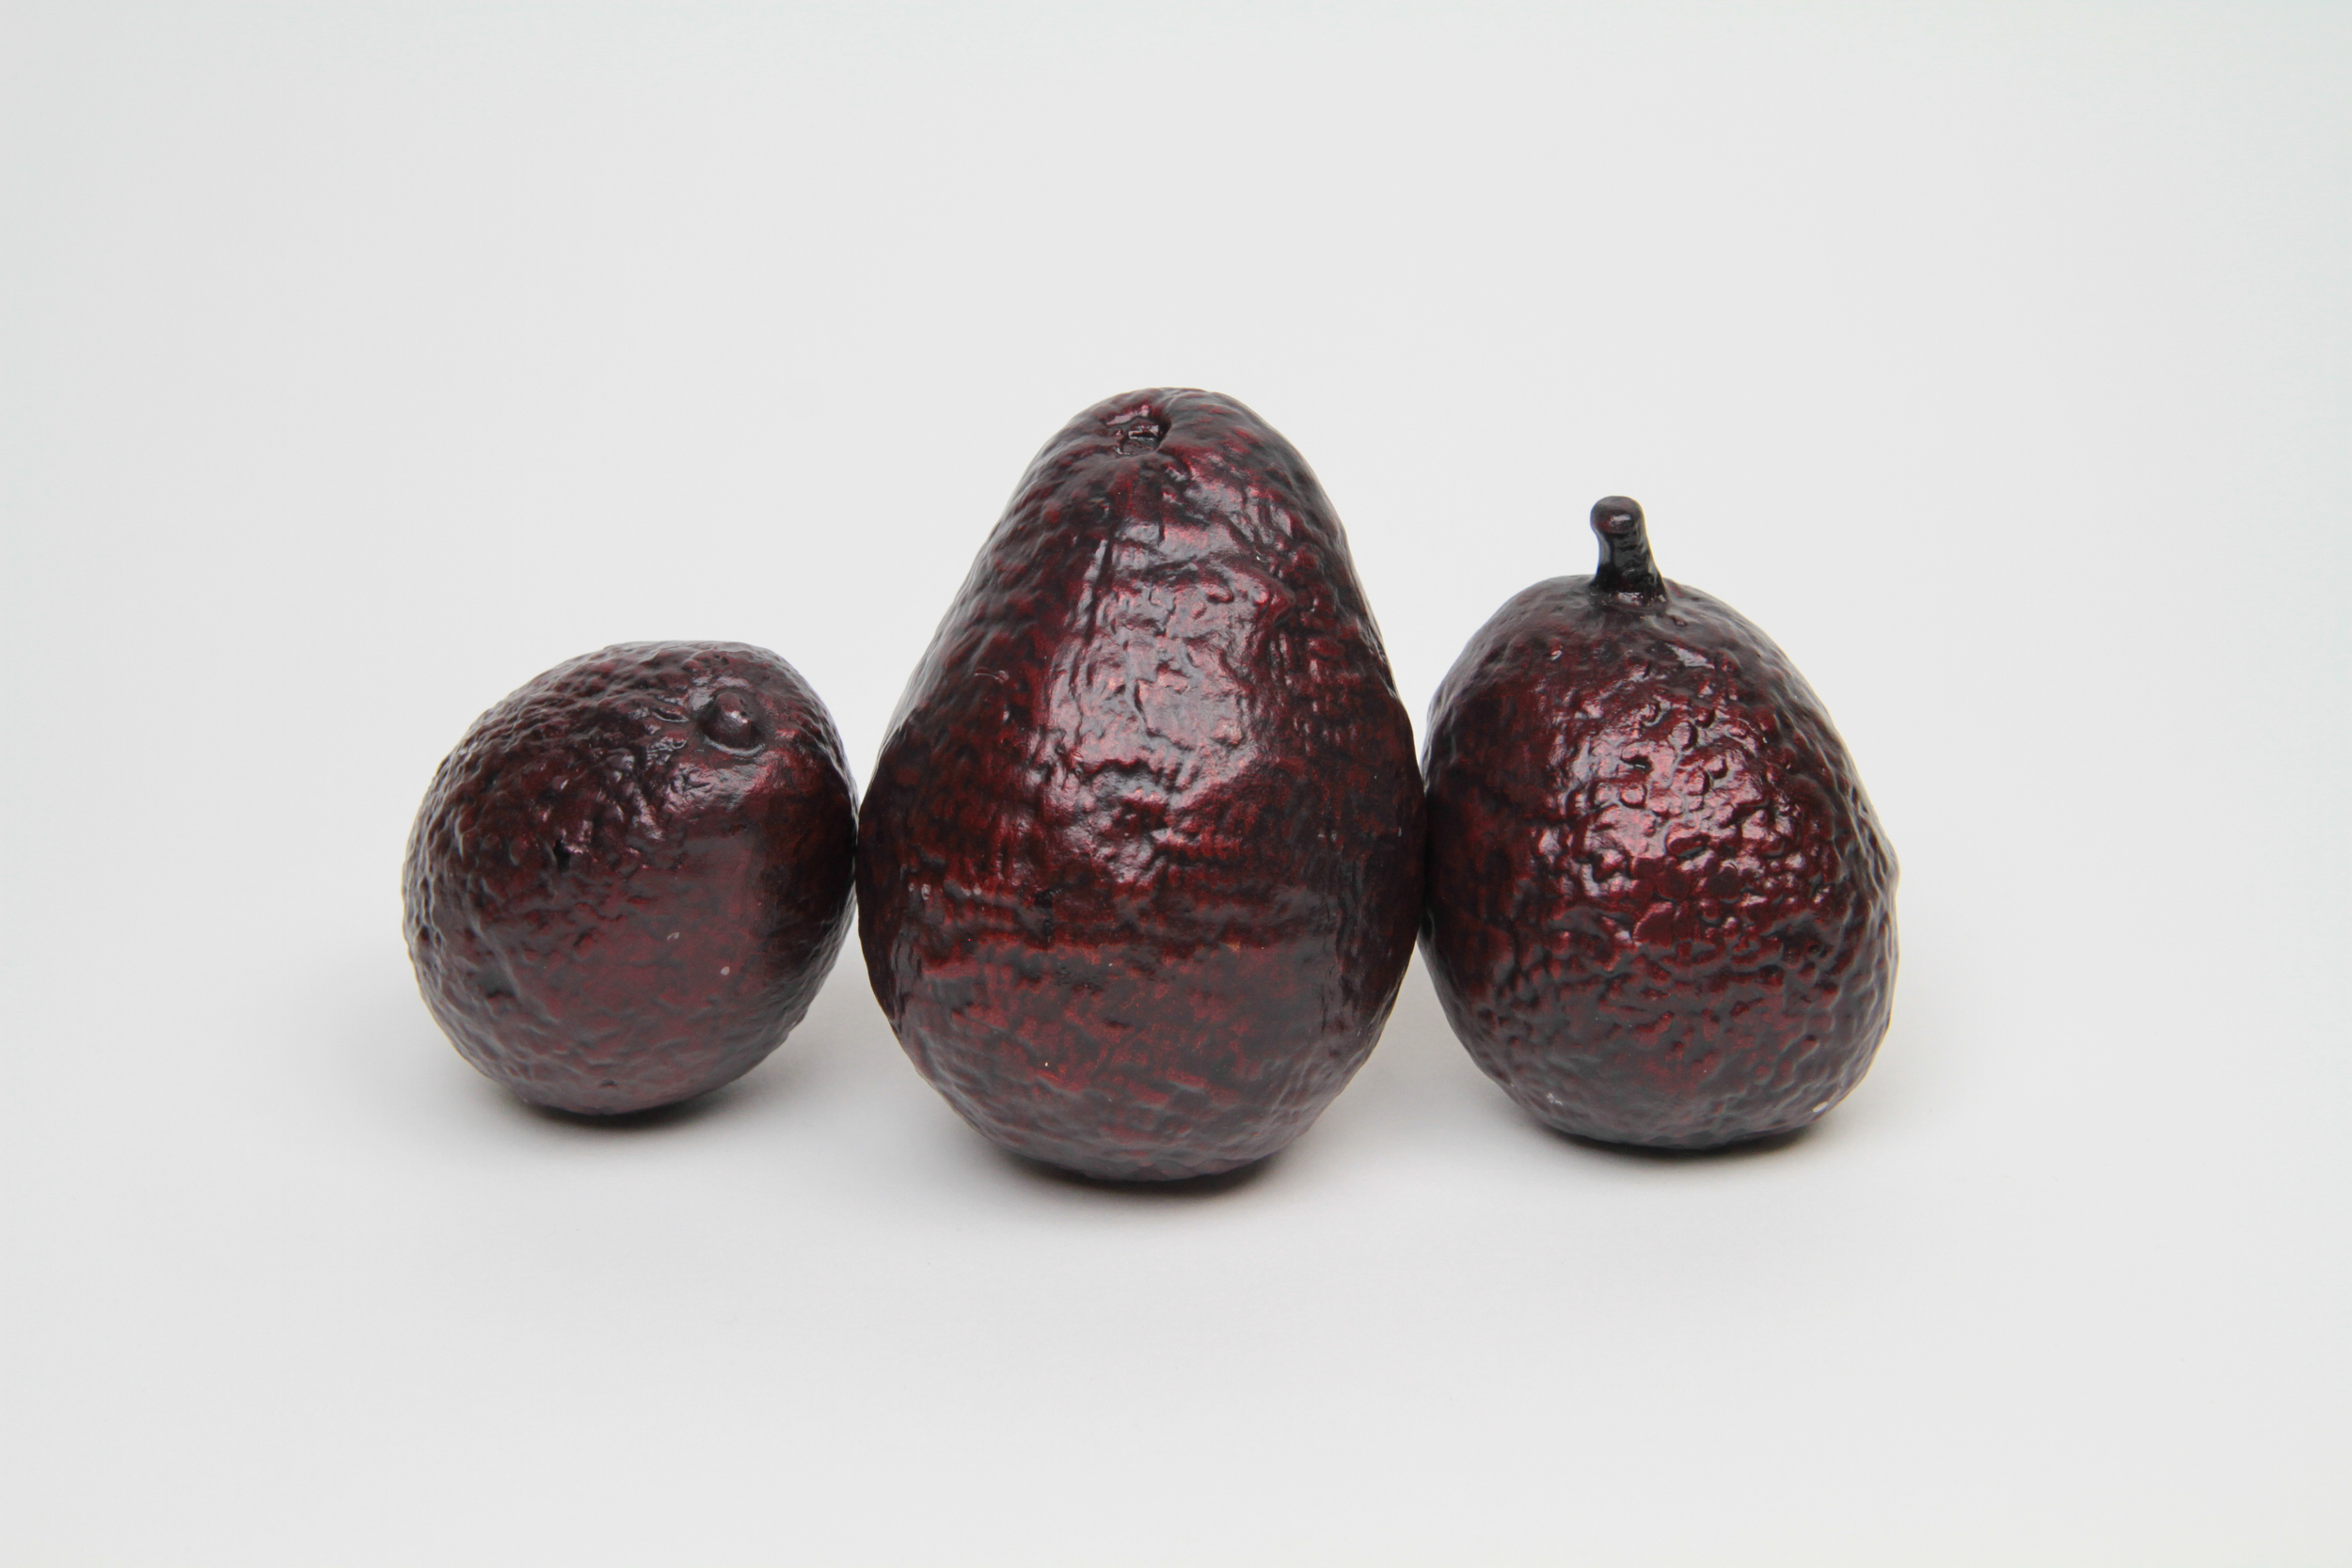   Aguacate Sangre  2016 Unique cast bronze (cast of imported Mexican avocado) Dimensions variable 